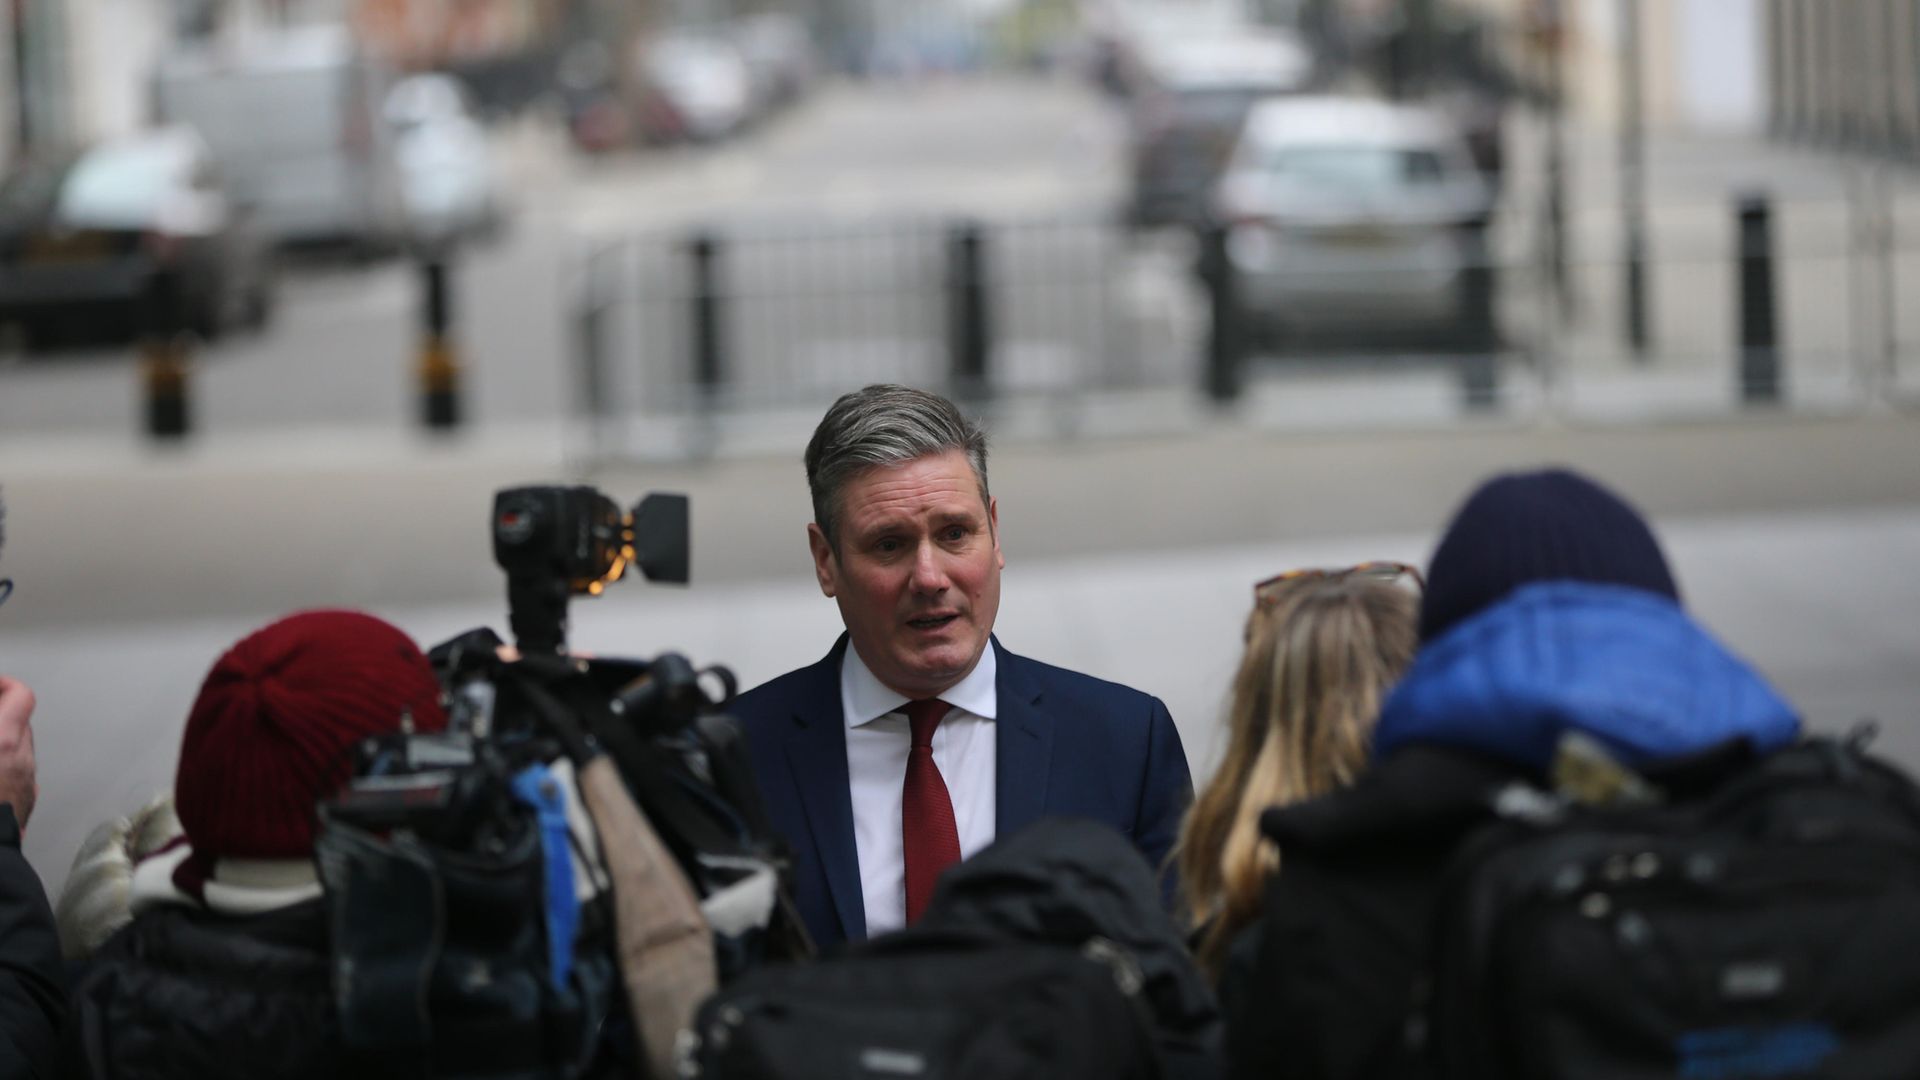 More than one-quarter of Labour branches have passed a motion to urge Sir Keir Starmer (pictured above) to consider electoral reform as a manifesto commitment - Credit: Tayfun Salci/Anadolu Agency via Getty Images